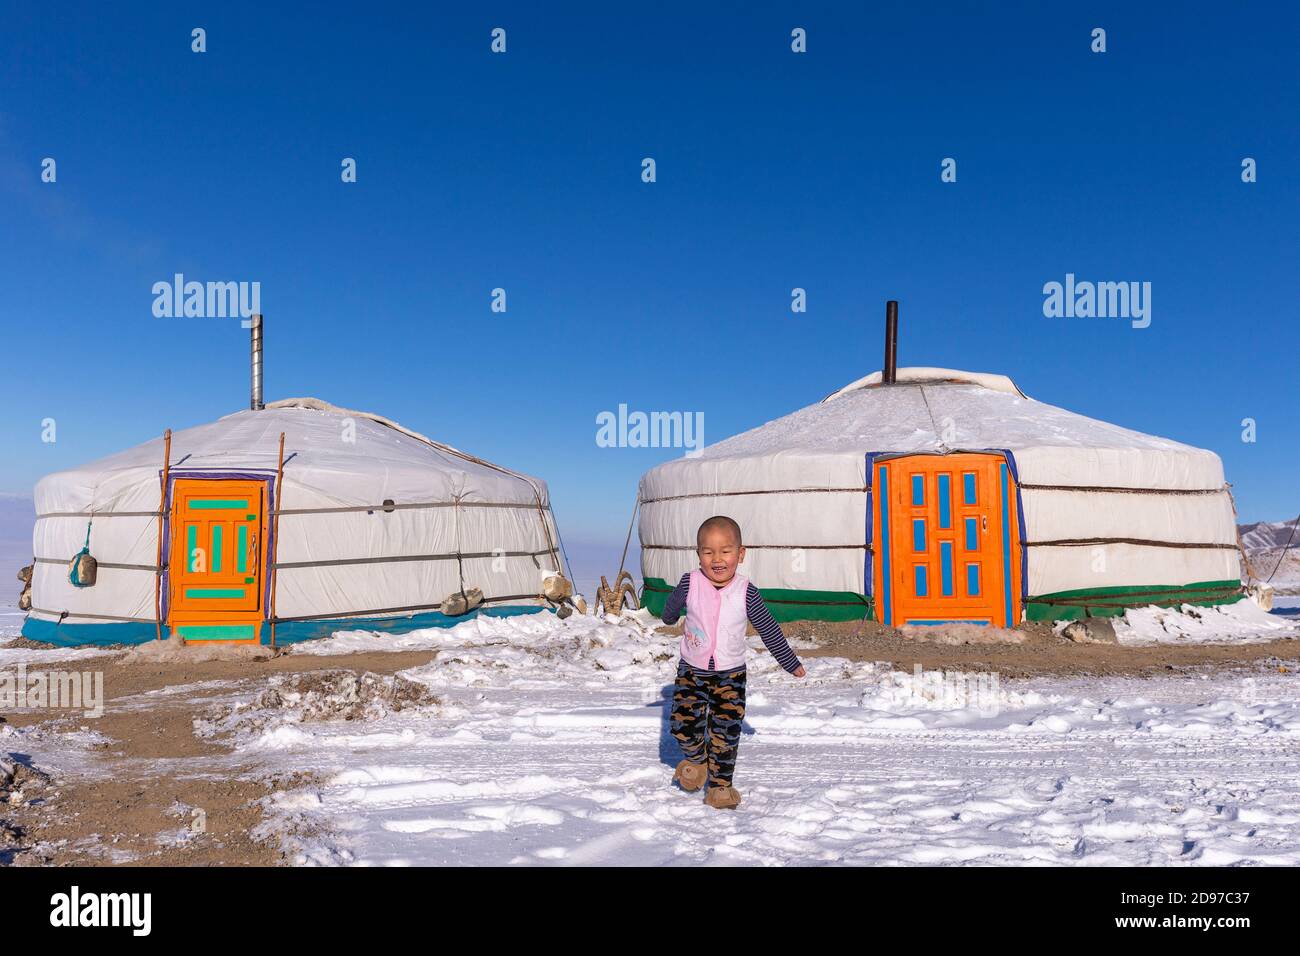 Yurt in the snow with a child, Altai mountains, West Mongolia, Mongolia Stock Photo